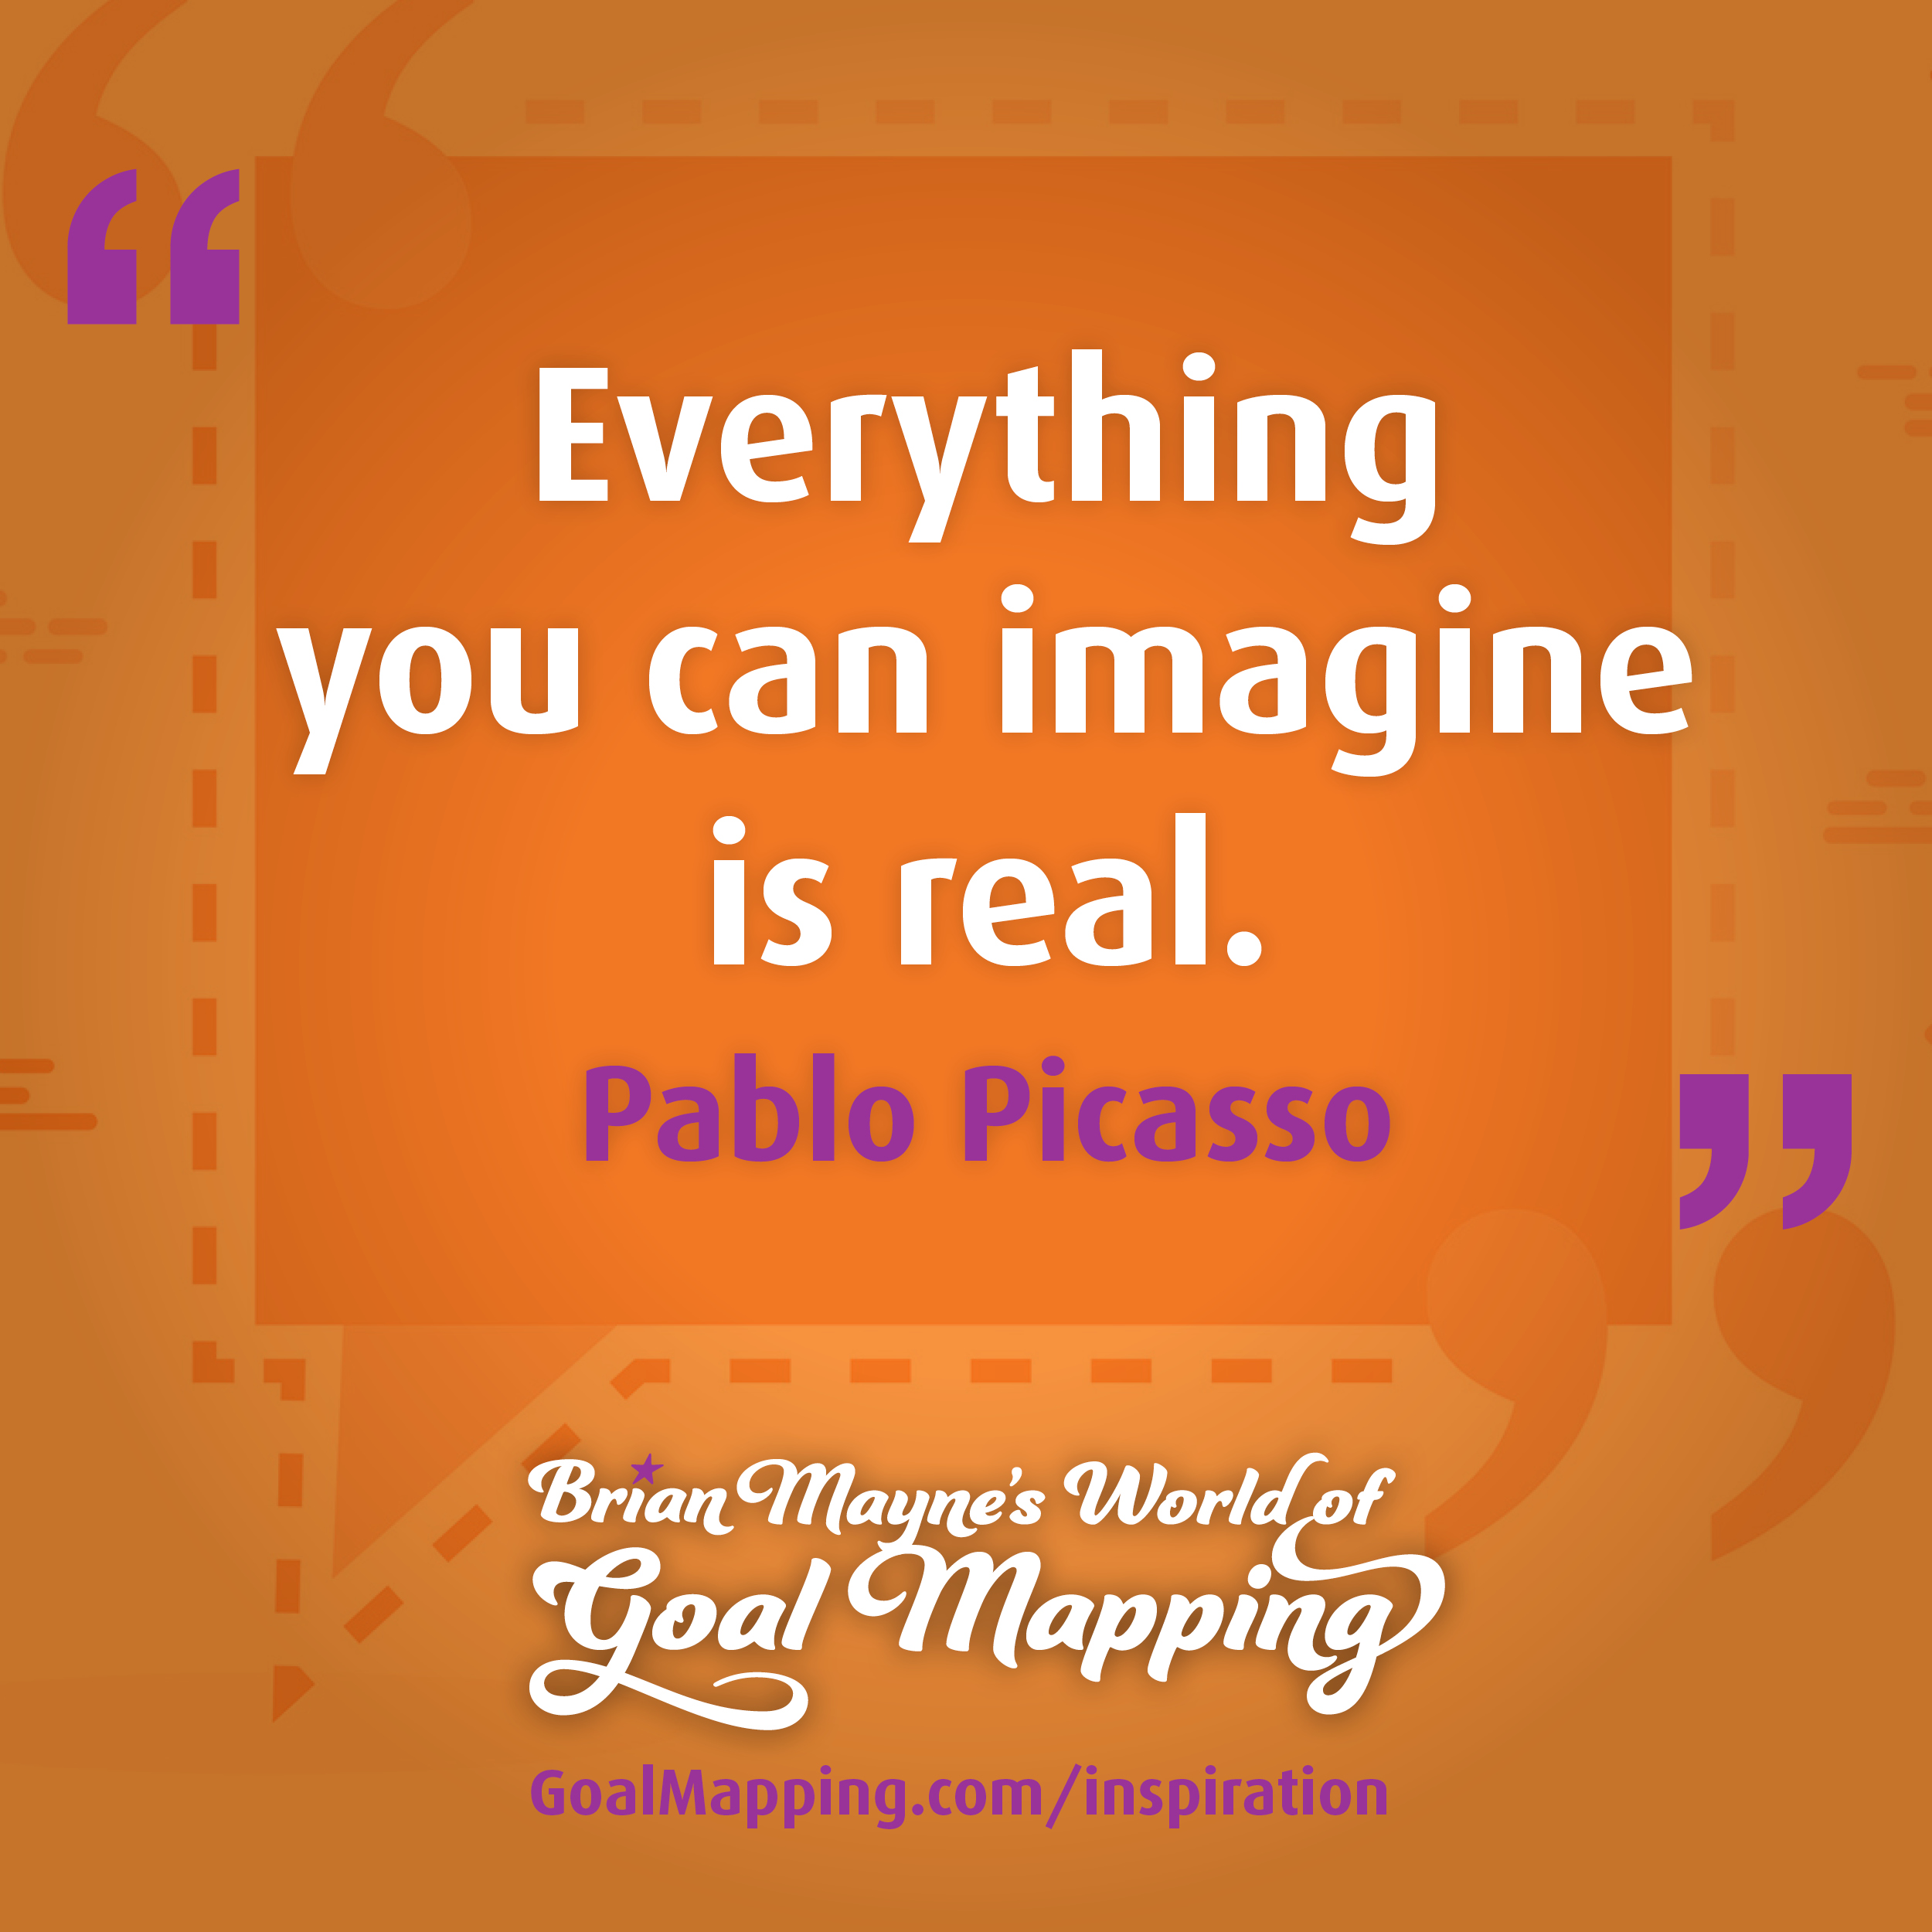 "Everything you can imagine is real." Pablo Picasso